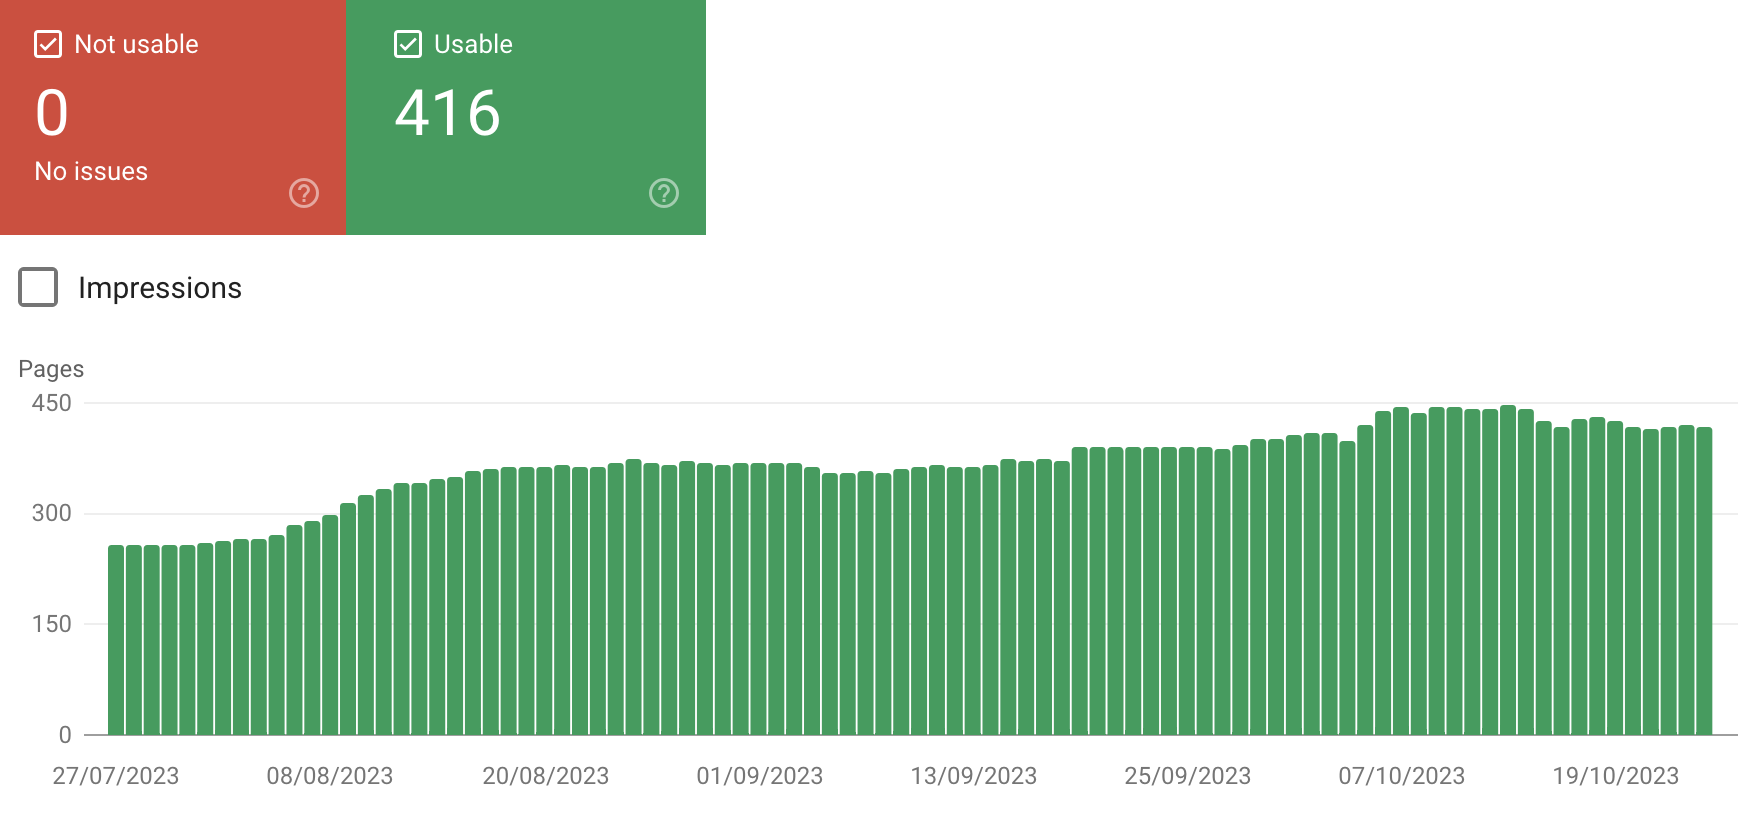 “Mobile Usability” report in Google Search Console